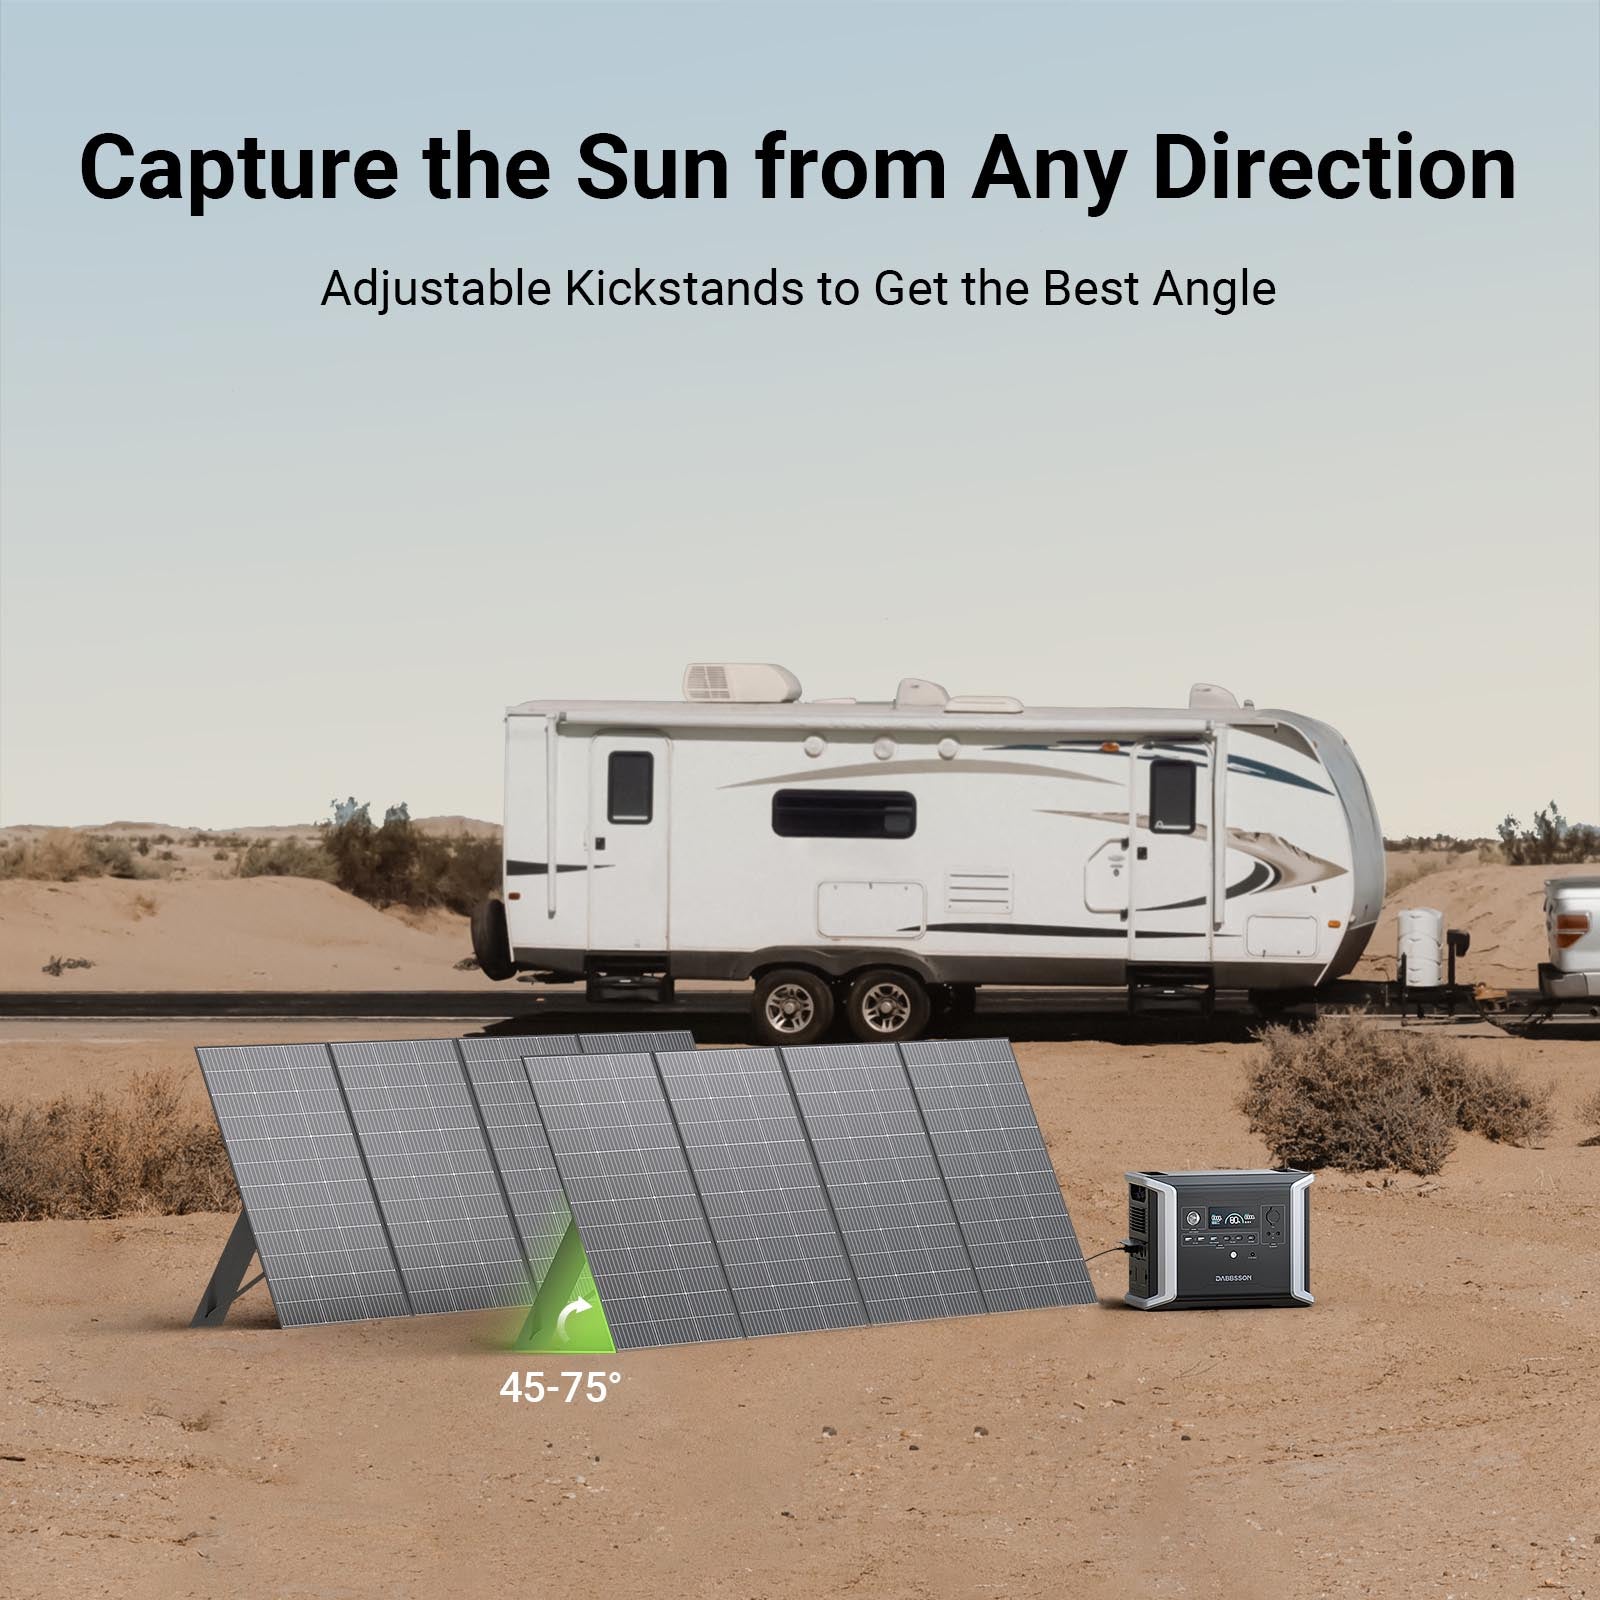 DBS420S Solar Panel Capture the Sun from Any Direction